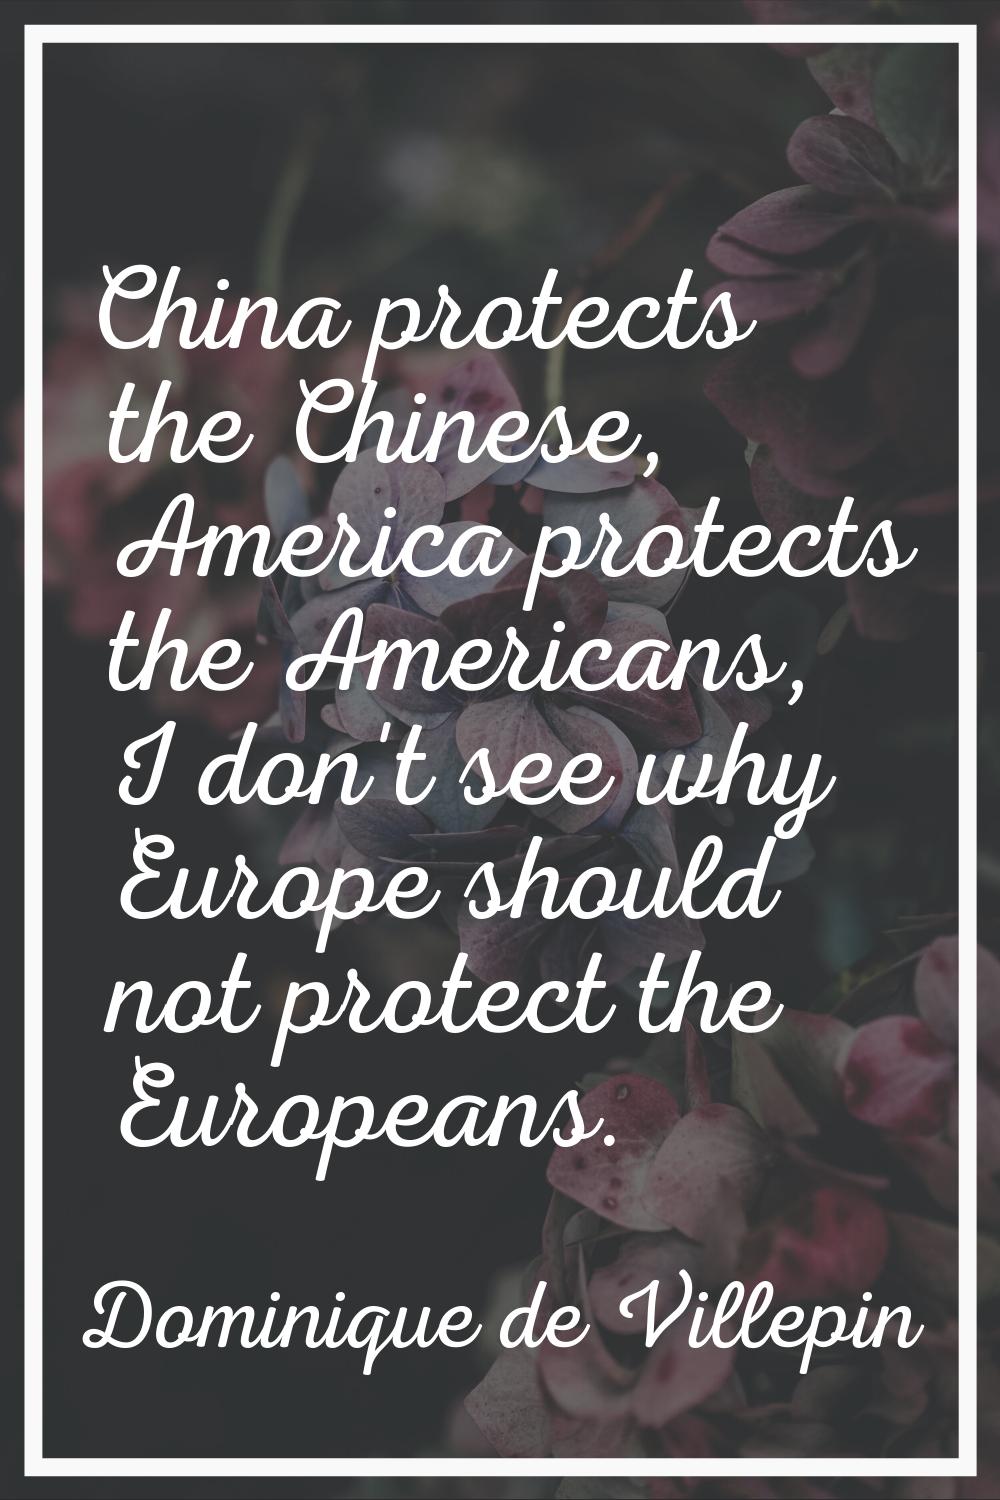 China protects the Chinese, America protects the Americans, I don't see why Europe should not prote